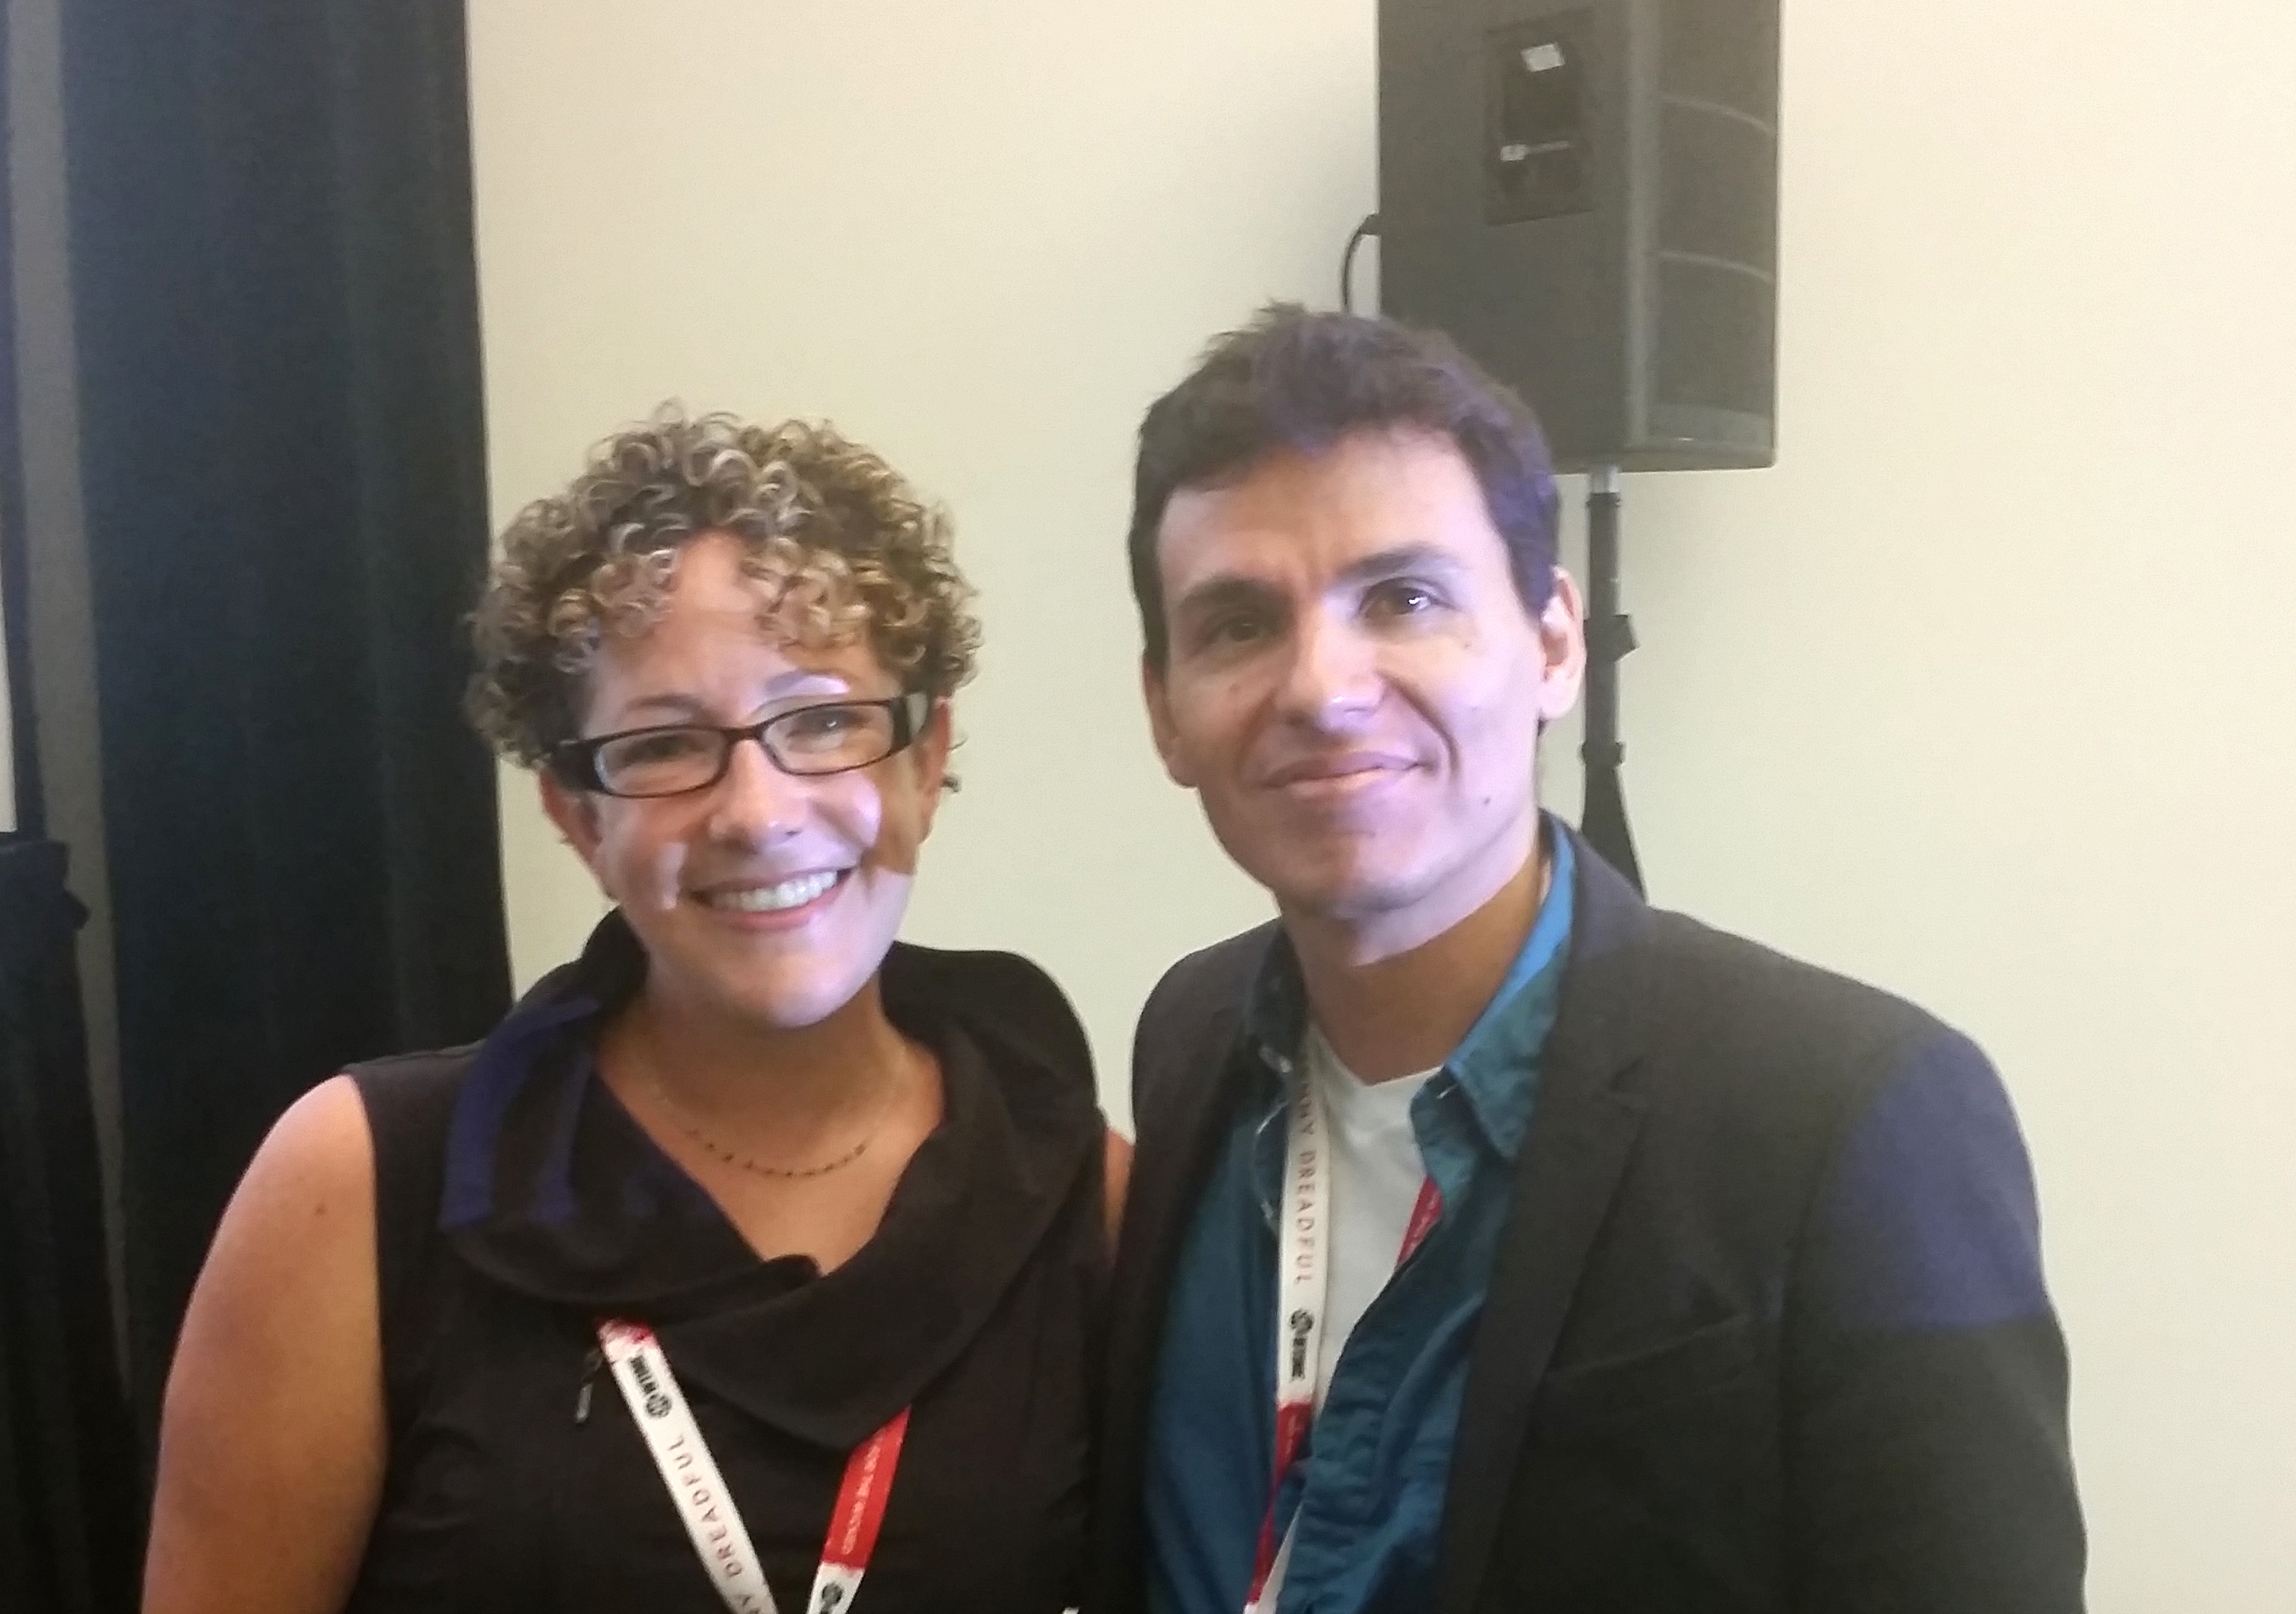 Writers Nicole Perlman and Andres Useche